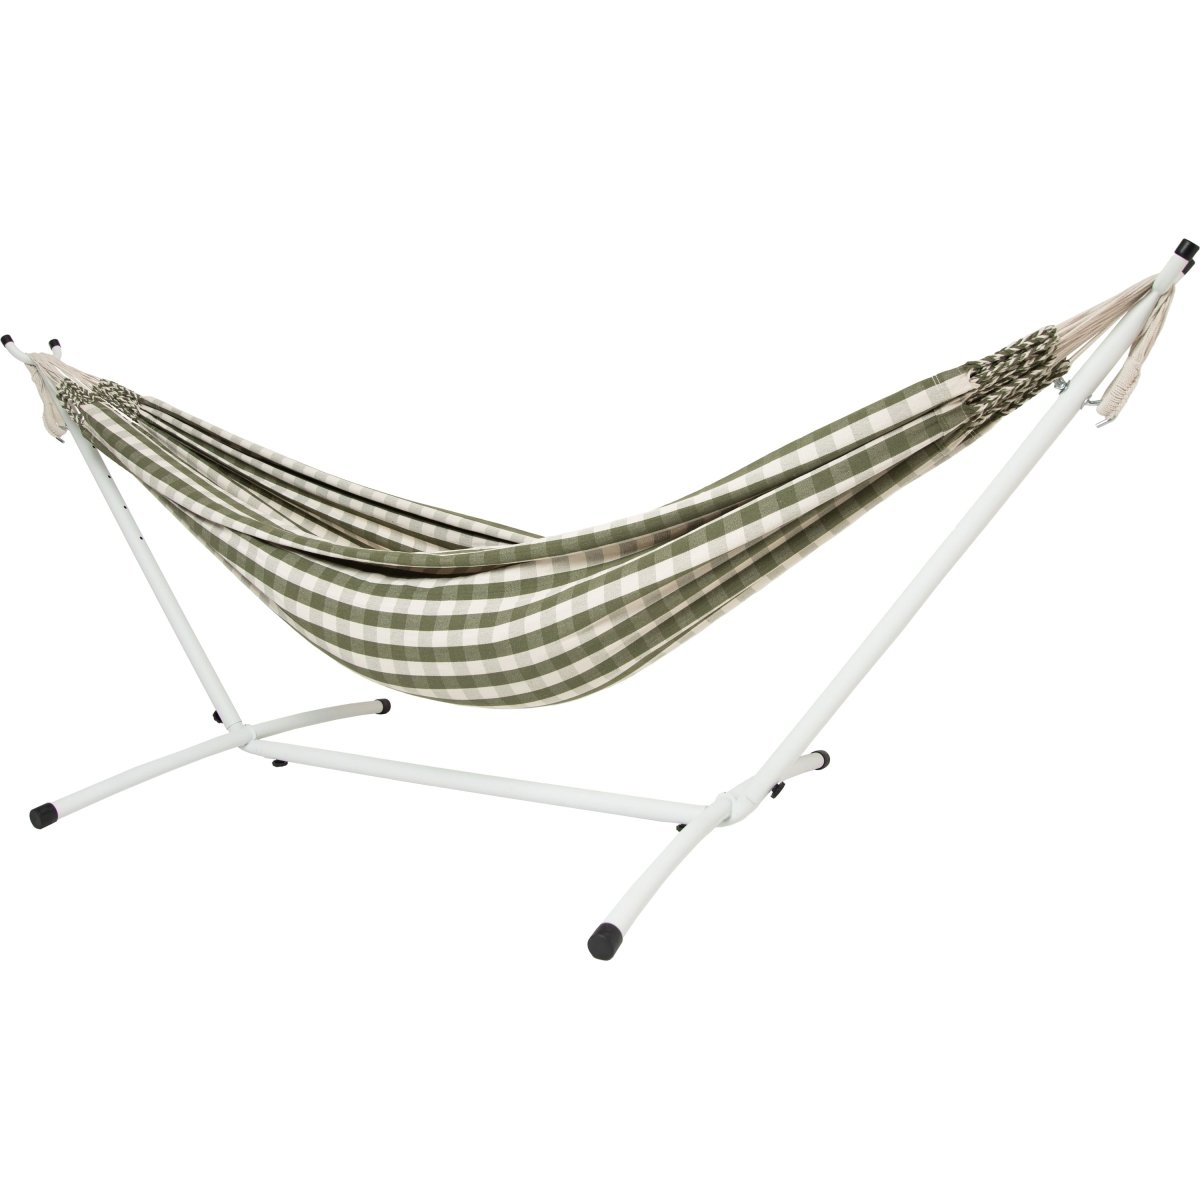 10ft White Universal Steel Hammock Stand &amp; Authentic Double Vichy Hammock in Urban Olive - Outdoorium